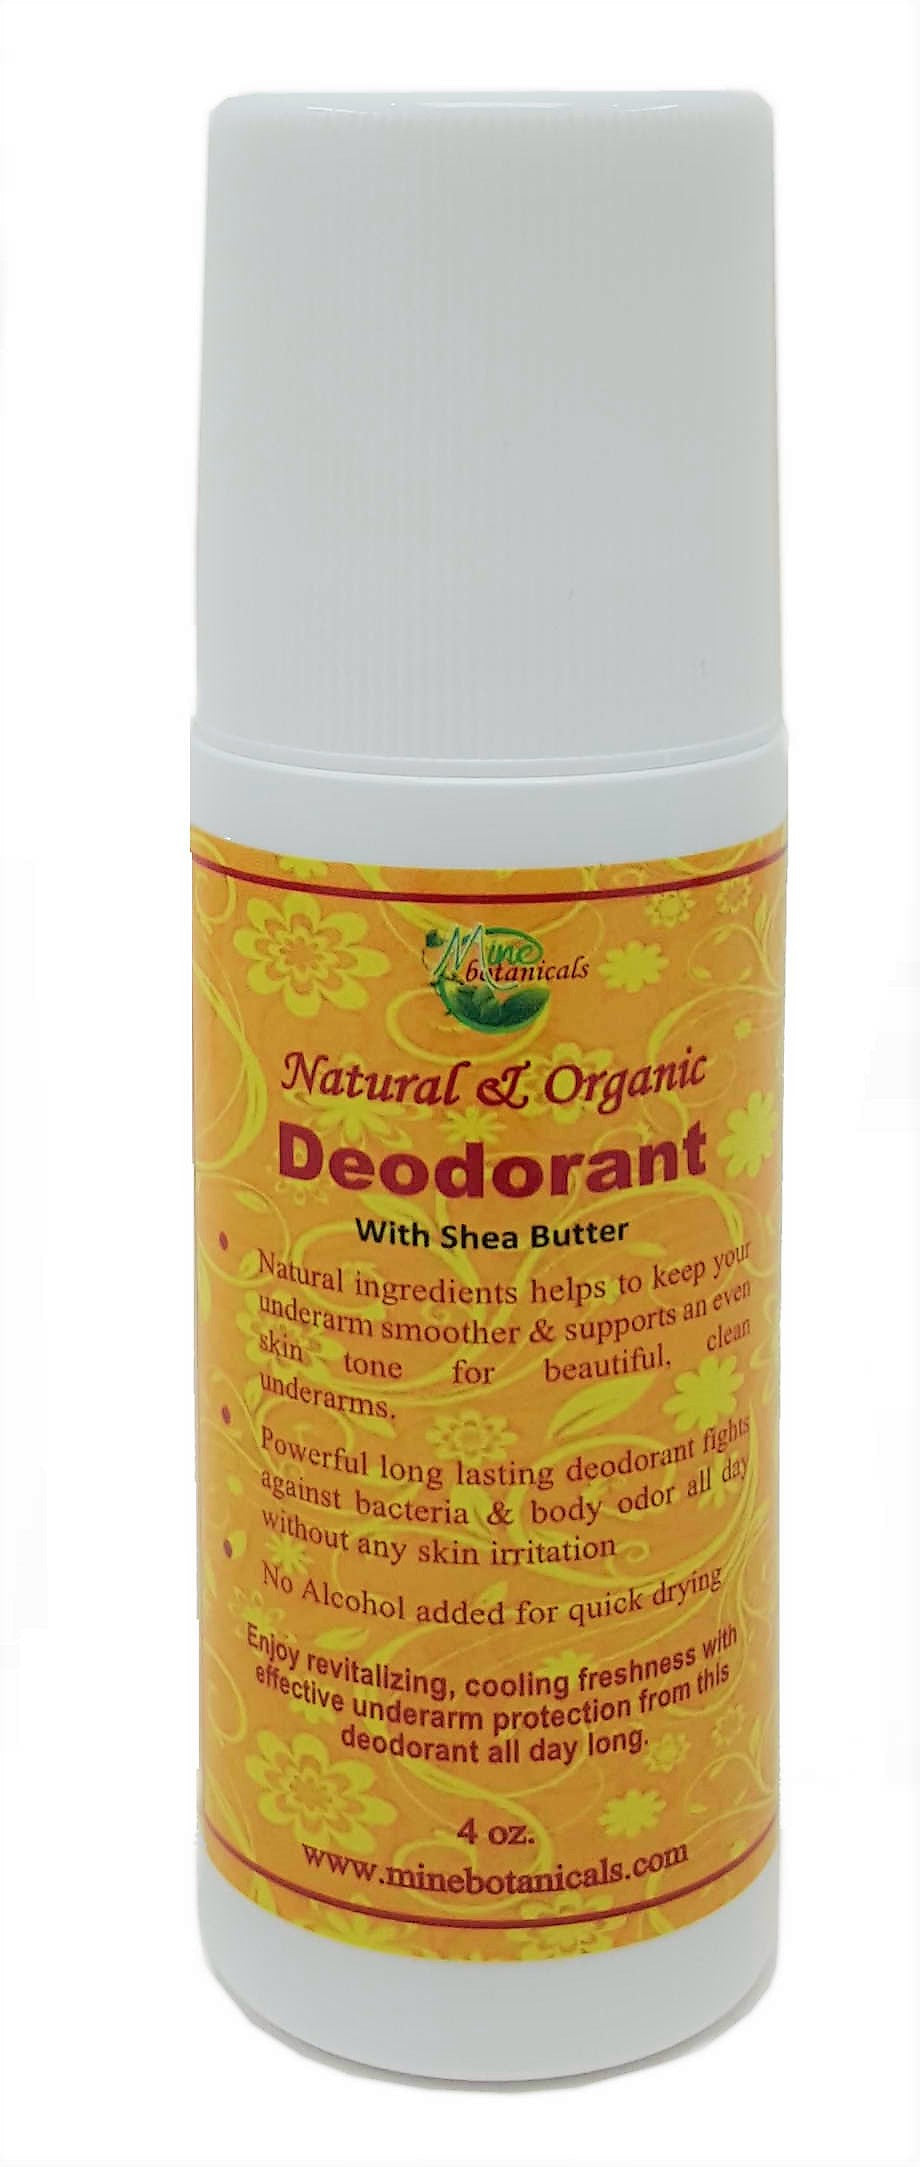 Natural & Organic Deodorant With Shea Butter